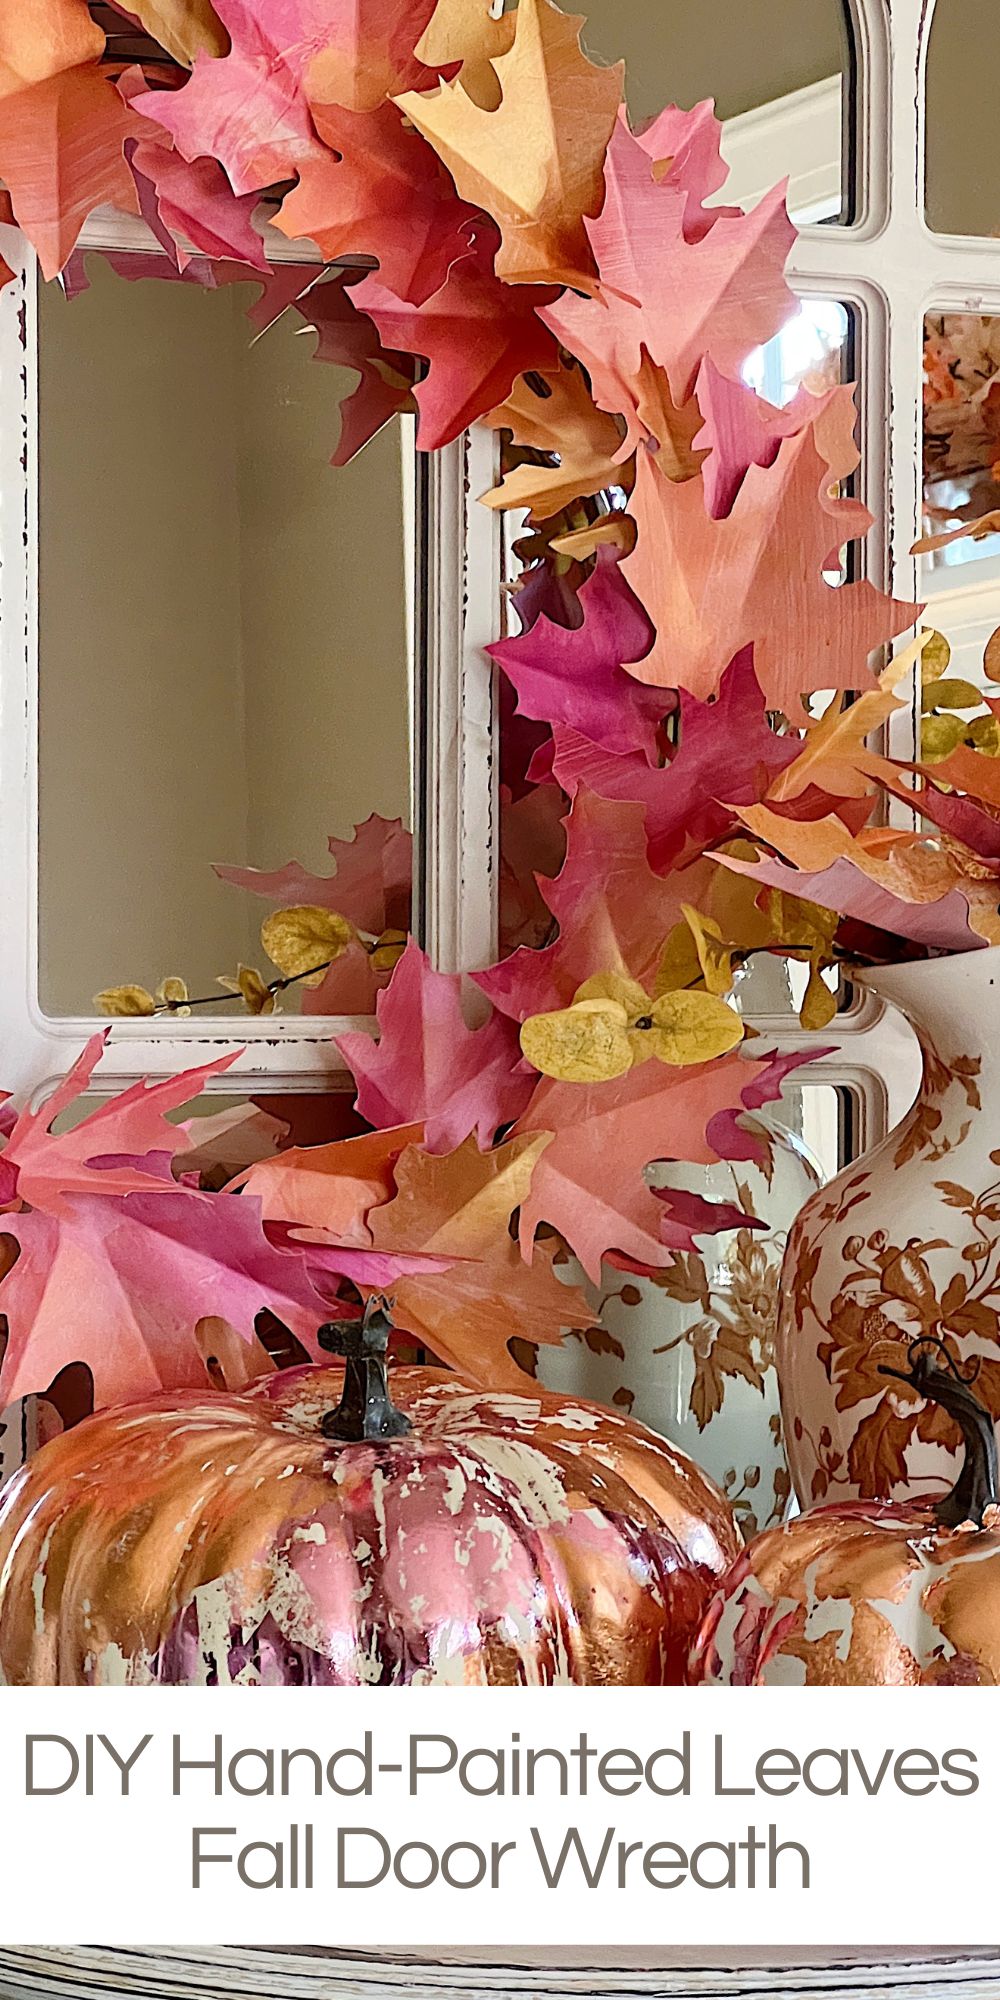 Today, I am combining two of my favorite things, painting, and crafting. I made beautiful hand-painted leaves and then a door wreath. 